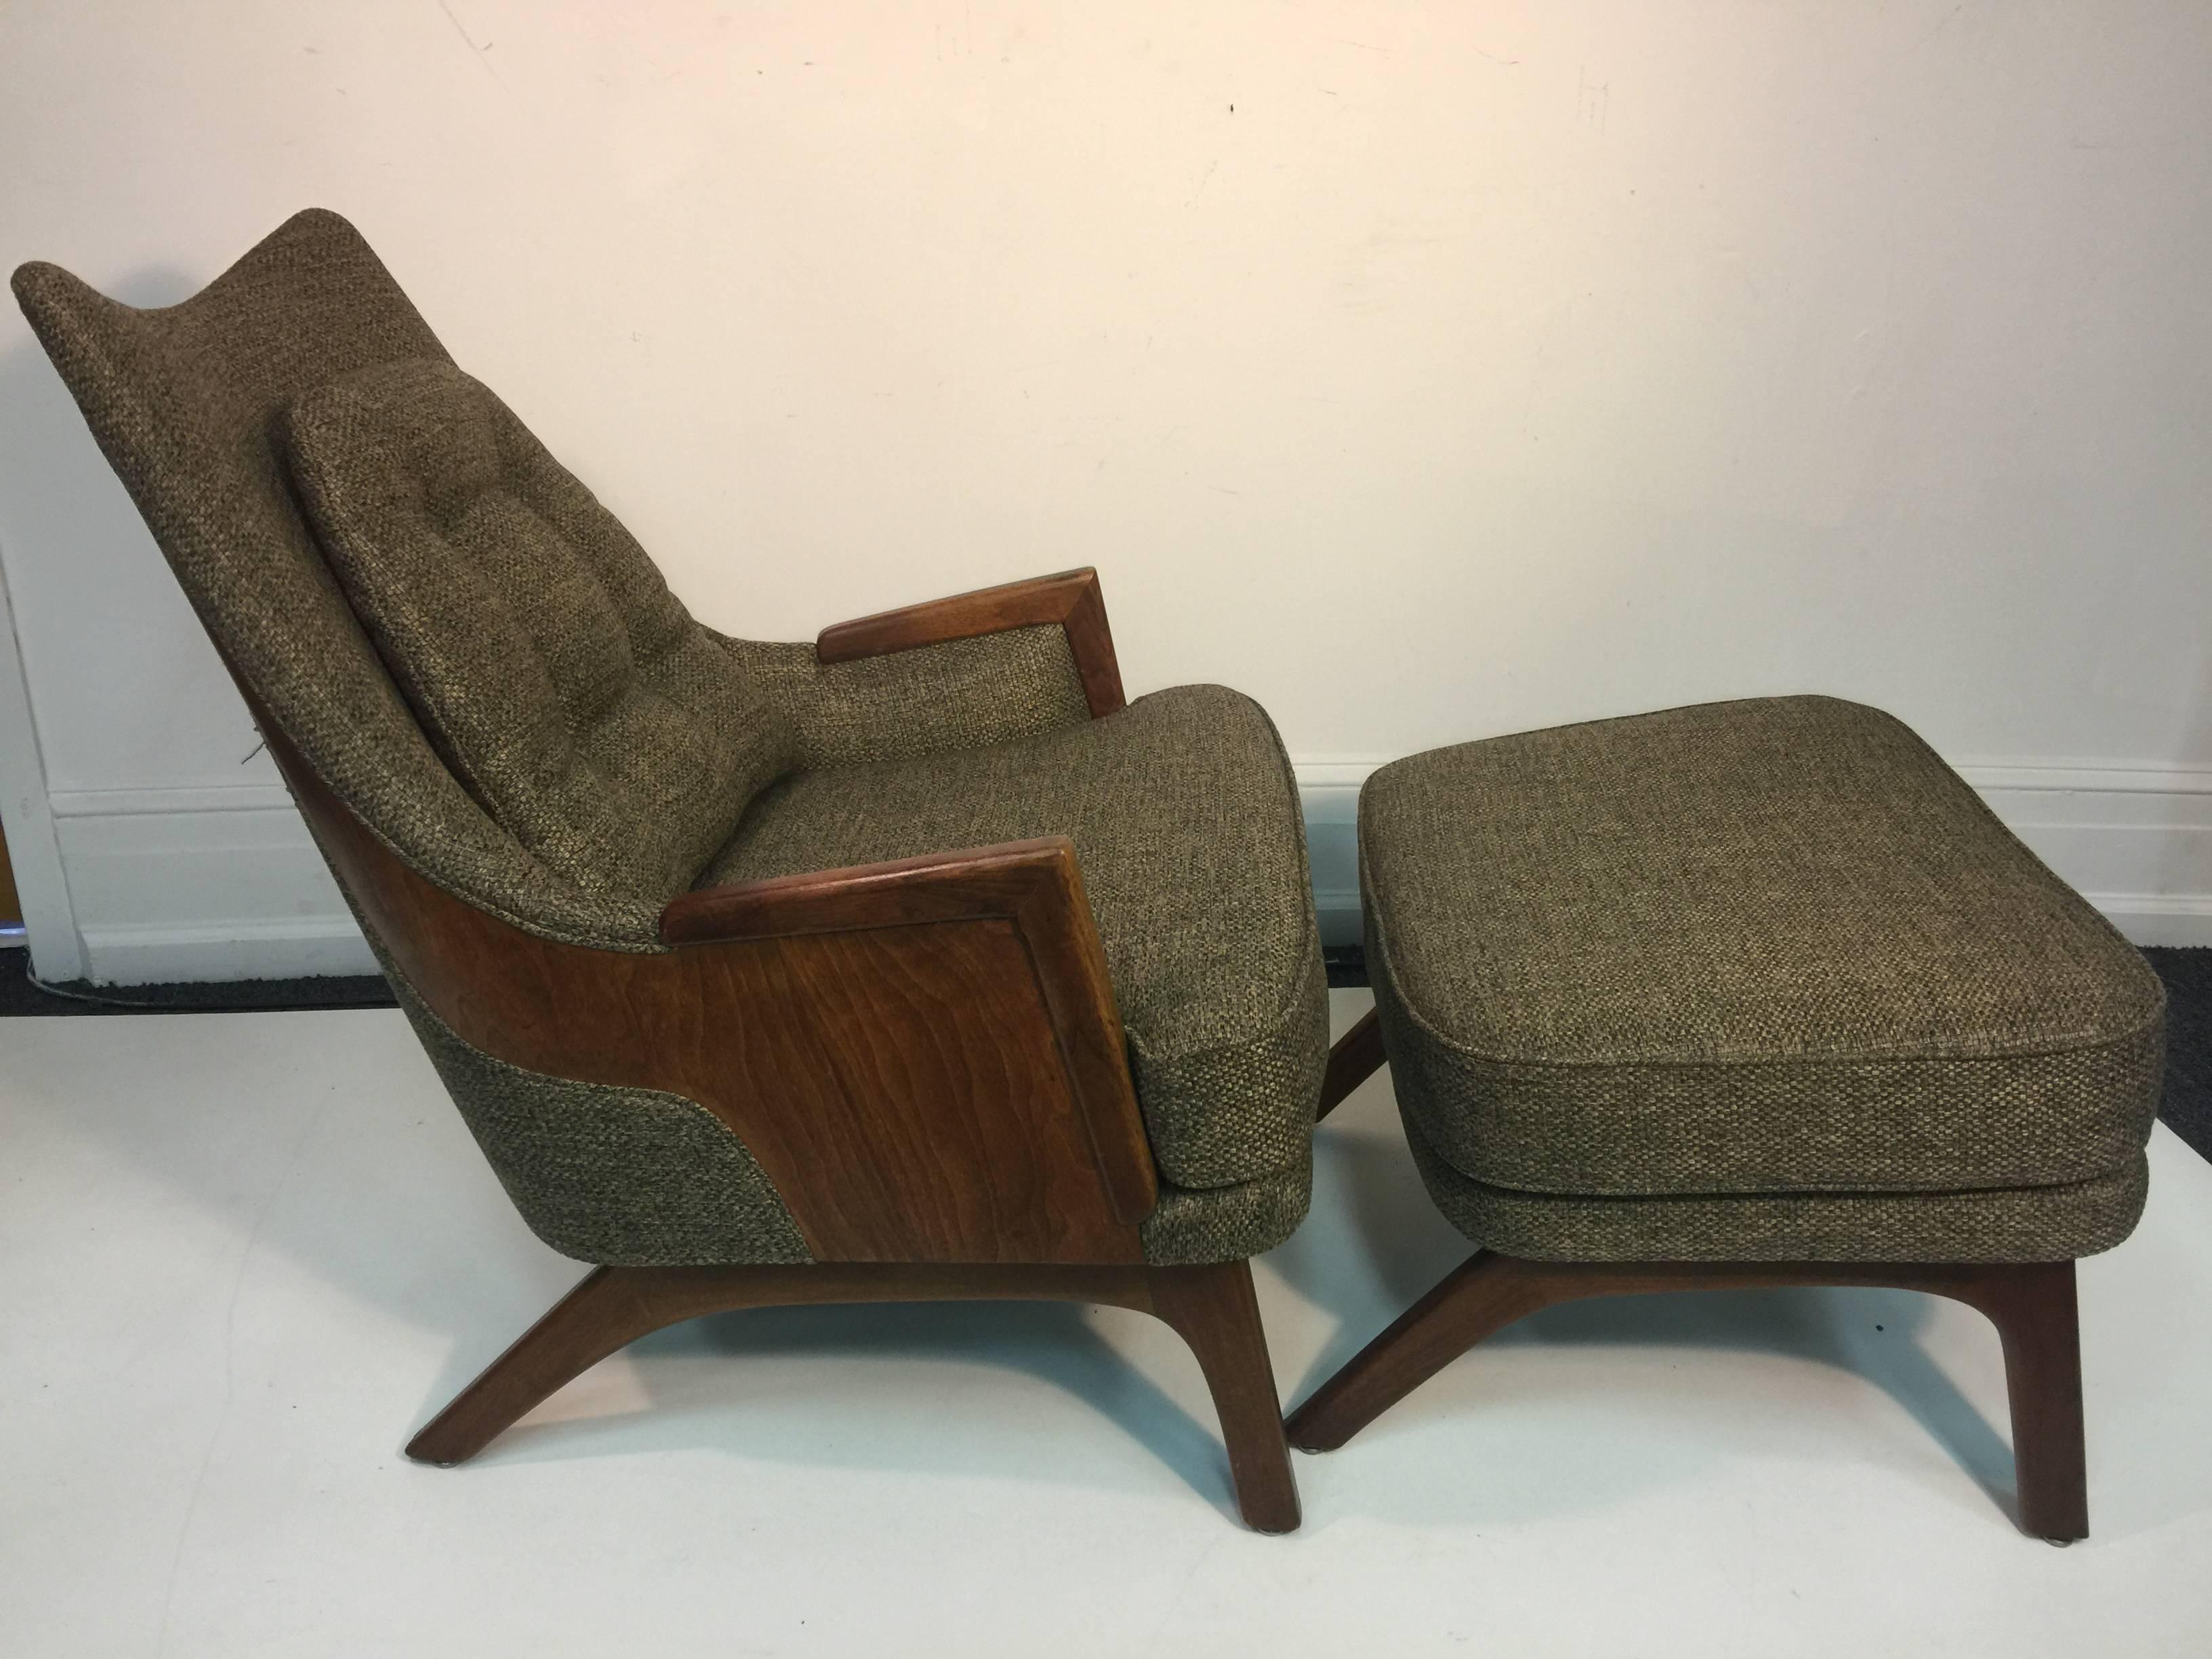 American Mid-Century Modern Lounge Chair and Ottoman by Adrian Pearsall